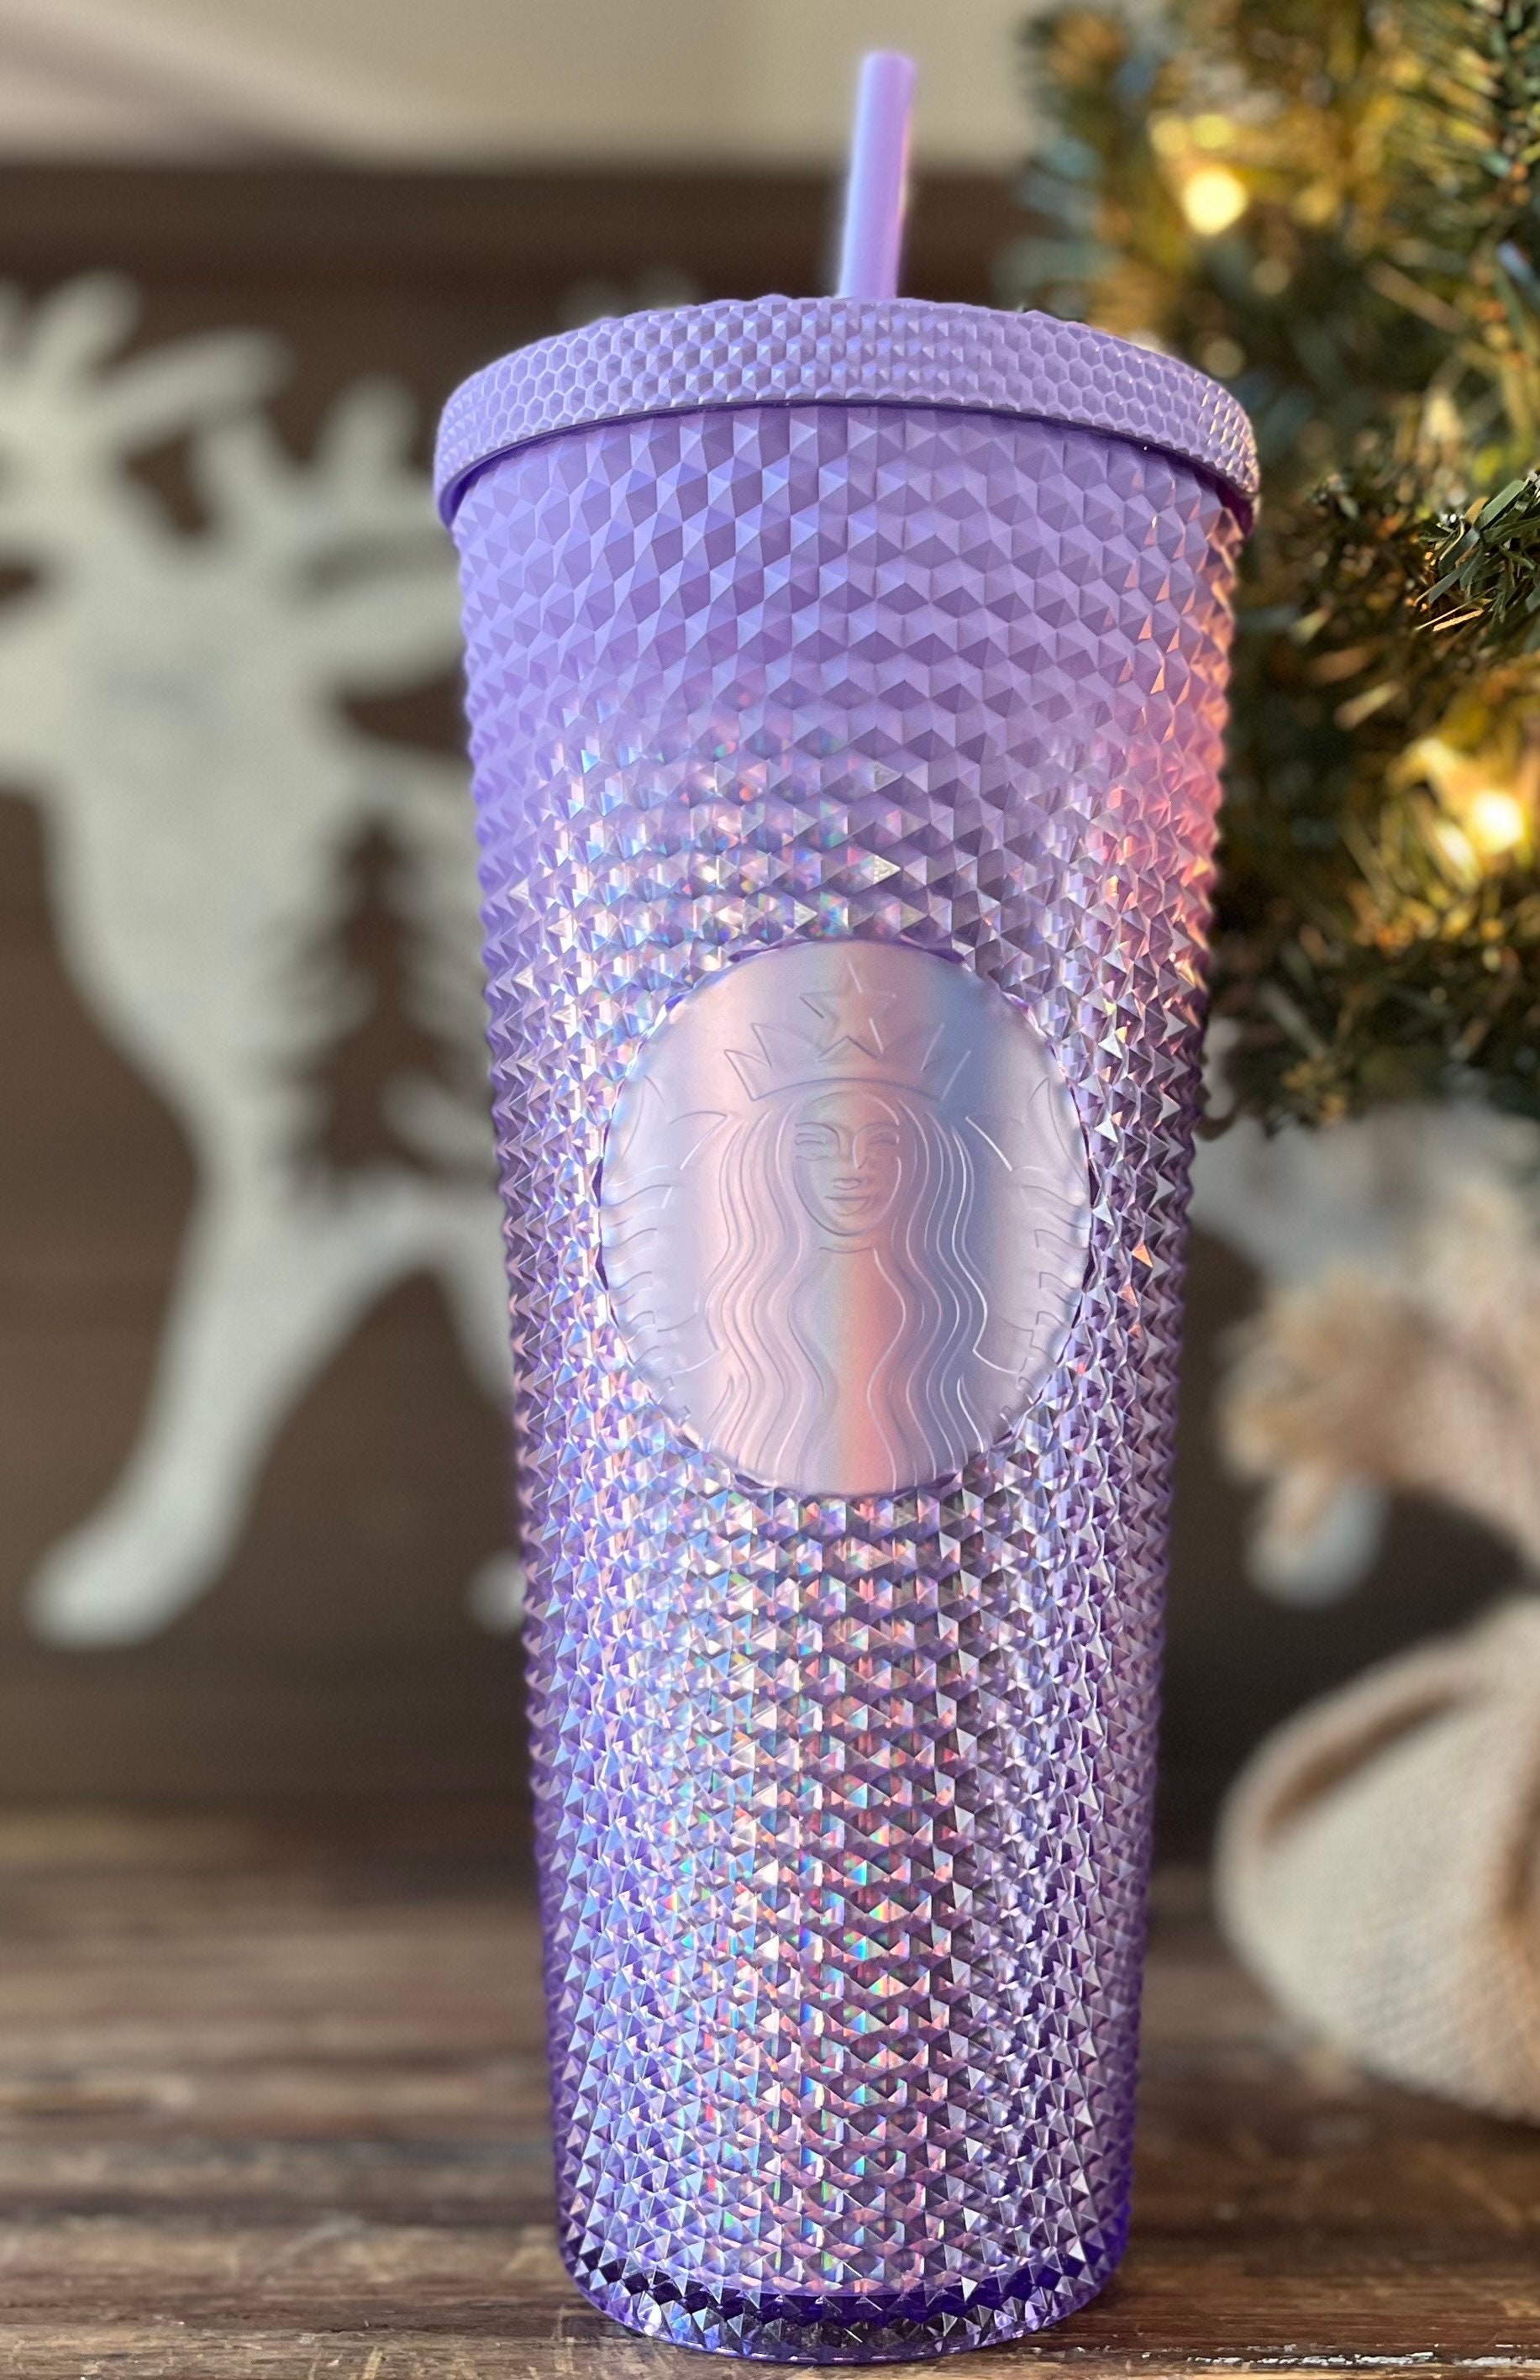 The absolute prettiest Starbucks cup ever!!! Lilac with a matte frosted  finish. So satisfyingly exquisite. 💜 : r/starbucks